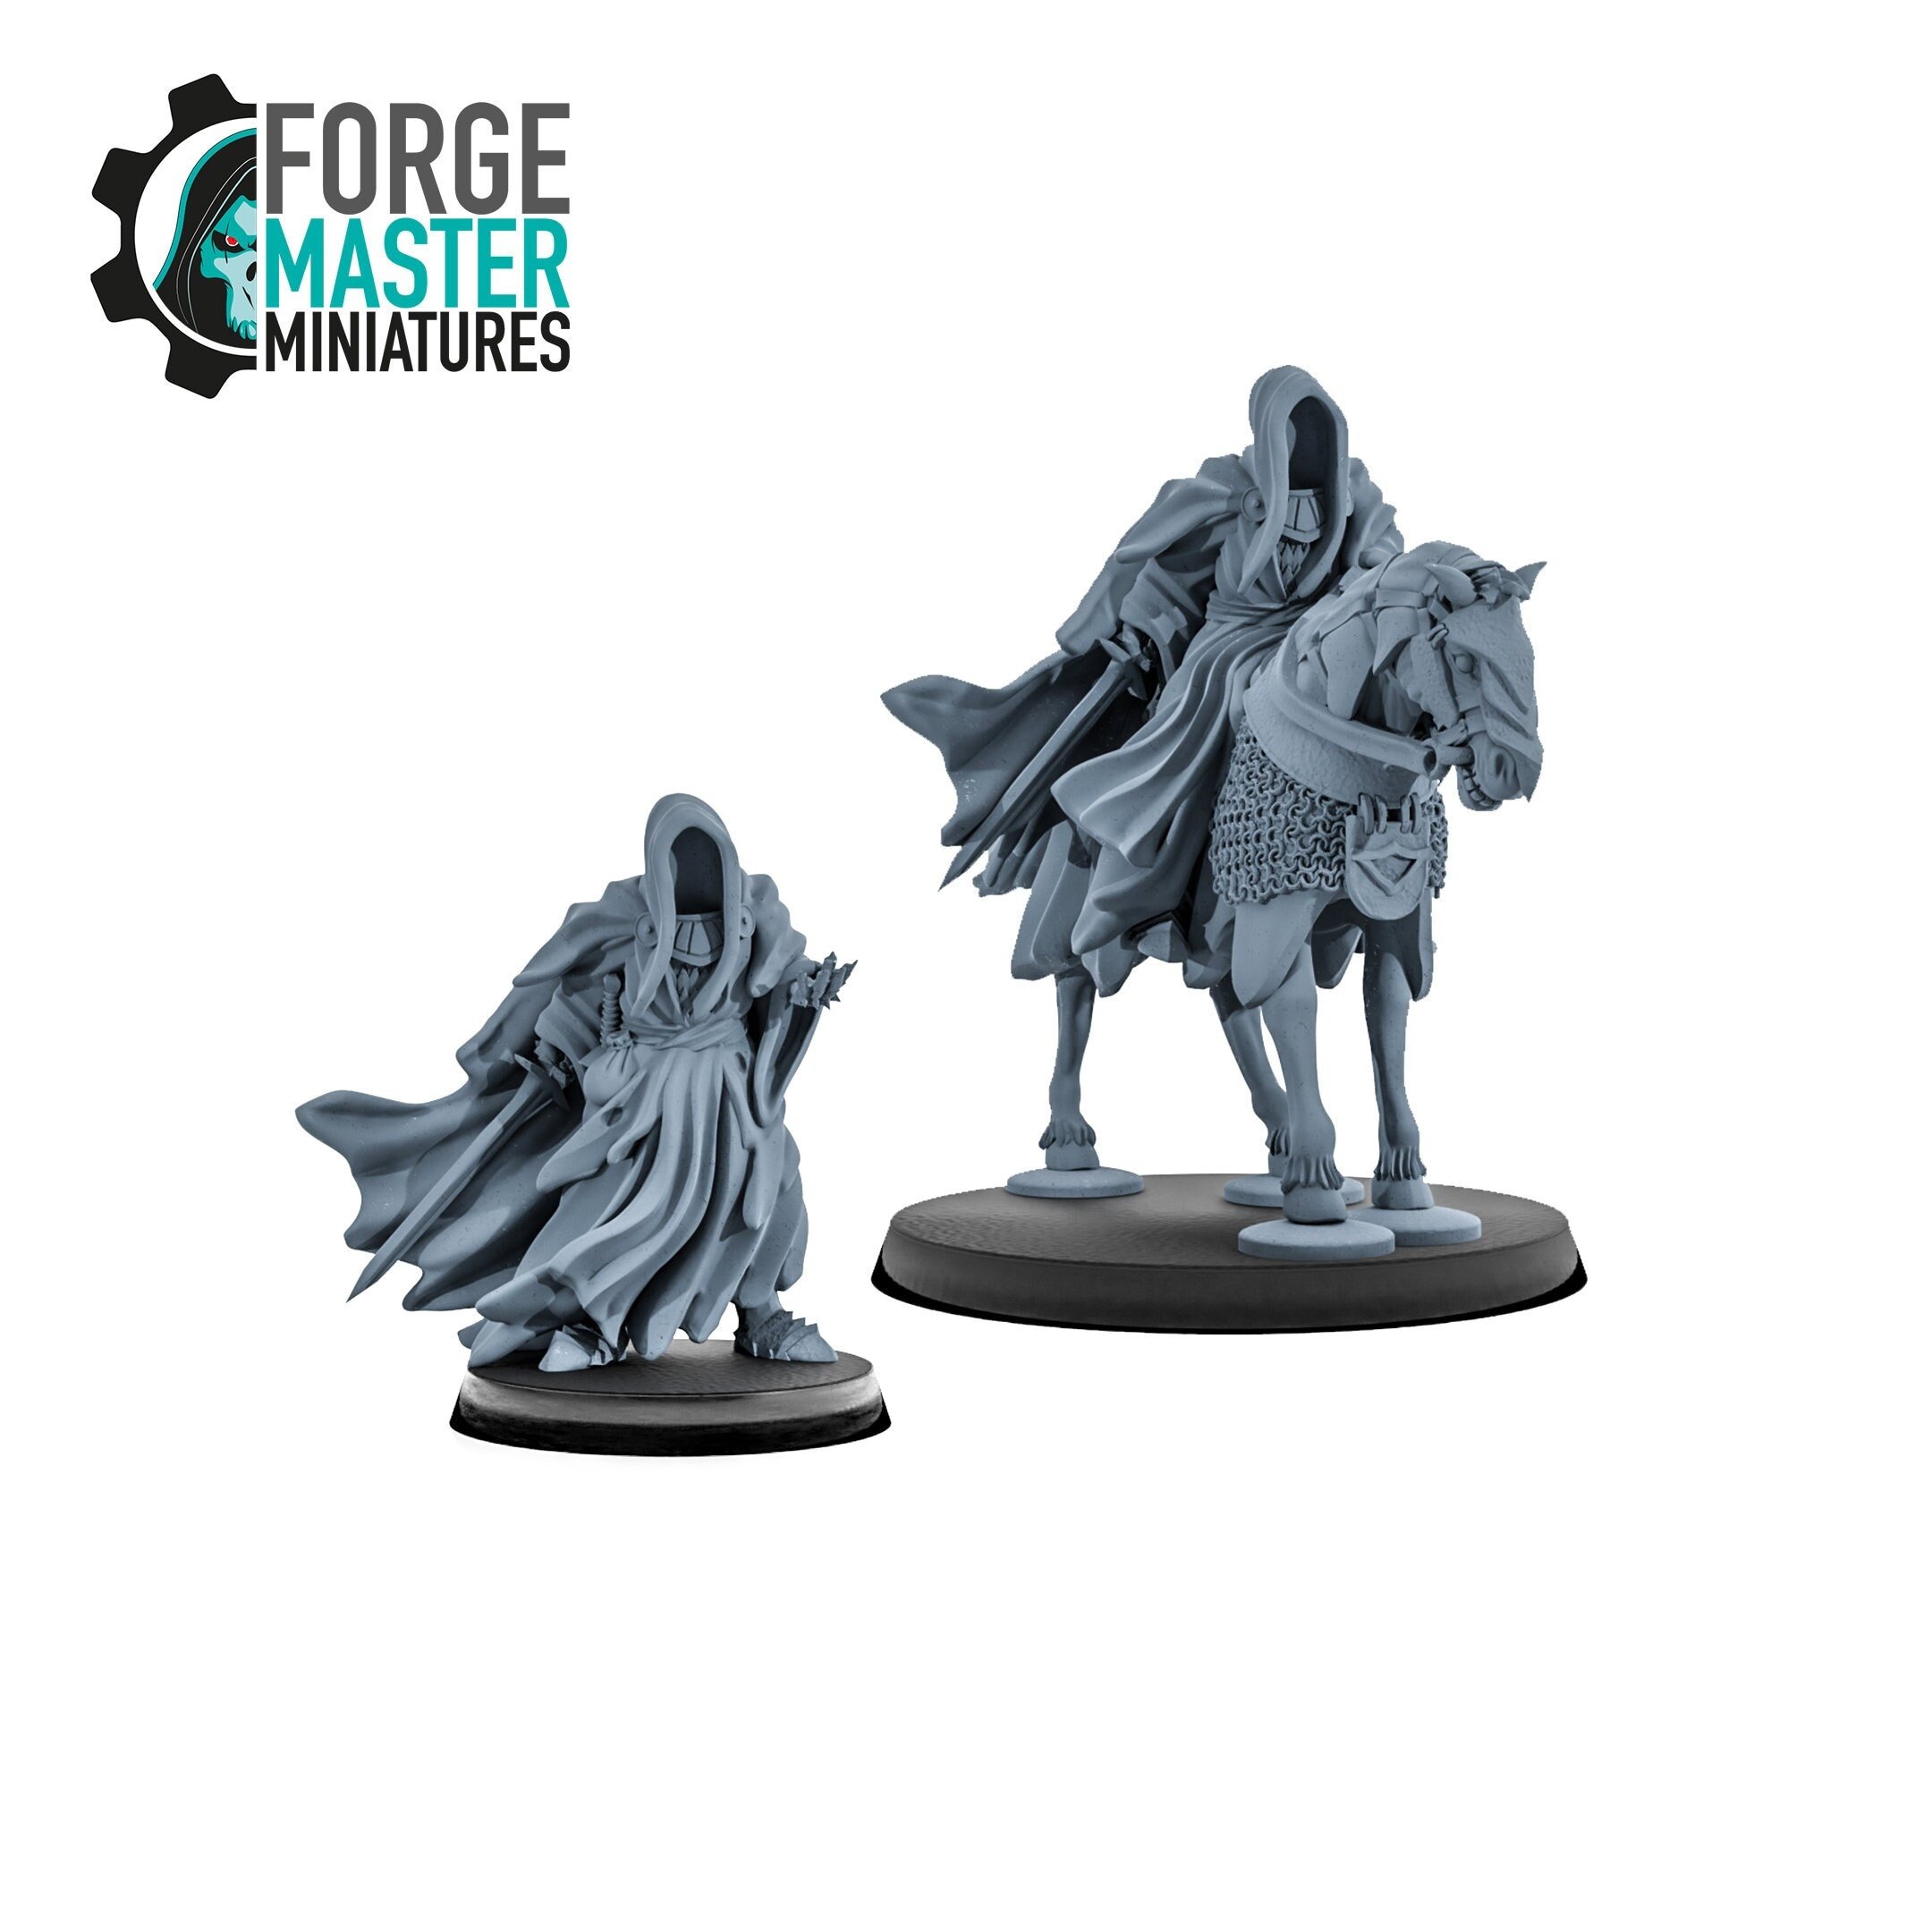 Eastern Lord Wraith wargaming miniatures by Kzk Minis 3D Printed by Forgemaster Miniatures